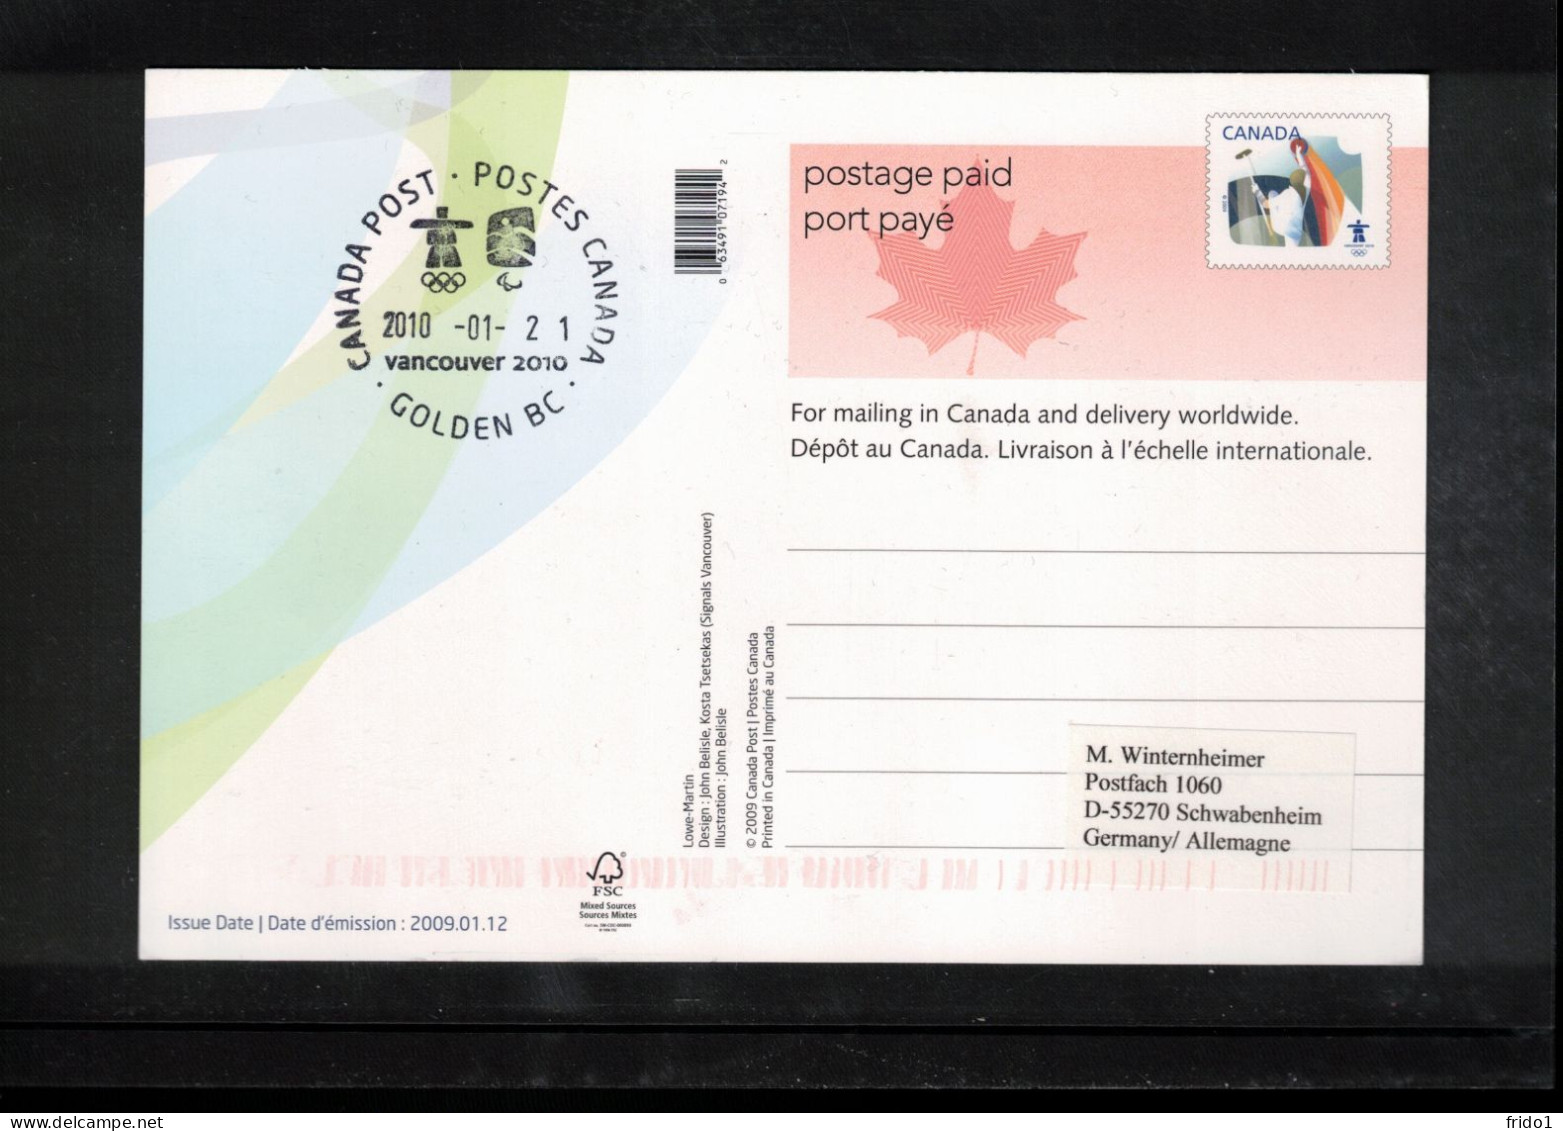 Canada 2010 Olympic Games Vancouver - GOLDEN BC Postmark Interesting Postcard - Hiver 2010: Vancouver